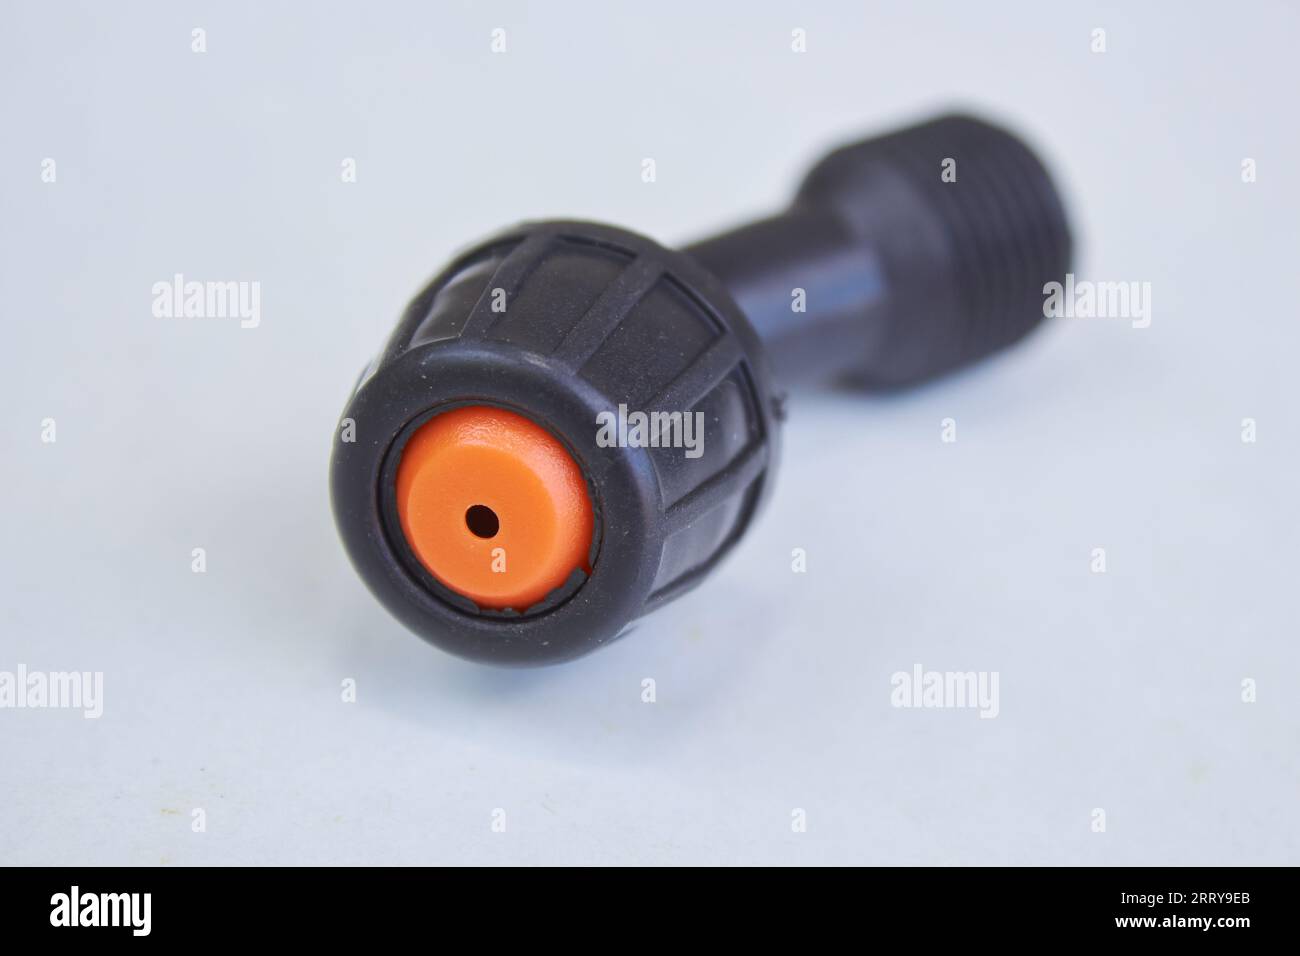 close up of a sprayer nozzle on a white background Stock Photo